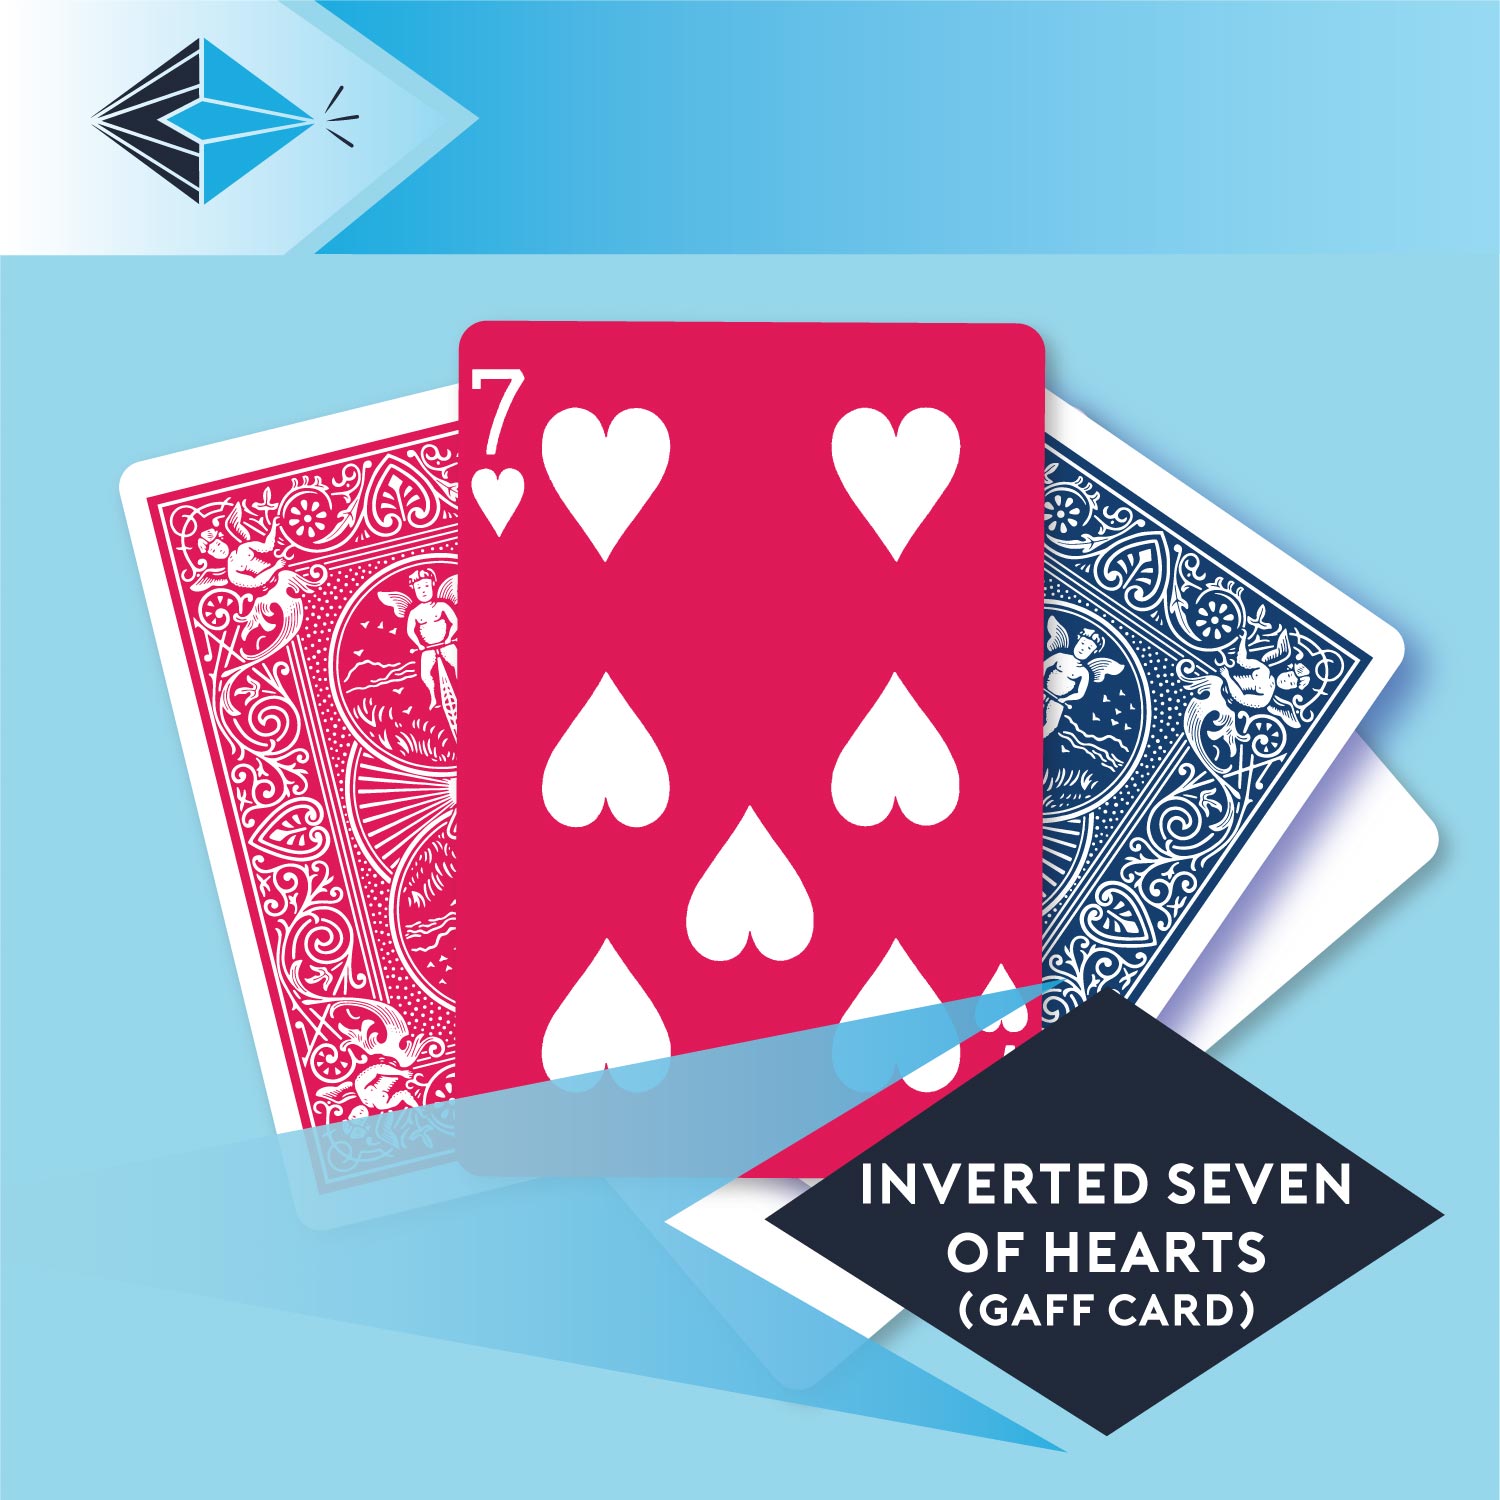 inverted seven of hearts gaff card 8 printbymagic magicians gaff cards printers Stockport Manchester UK